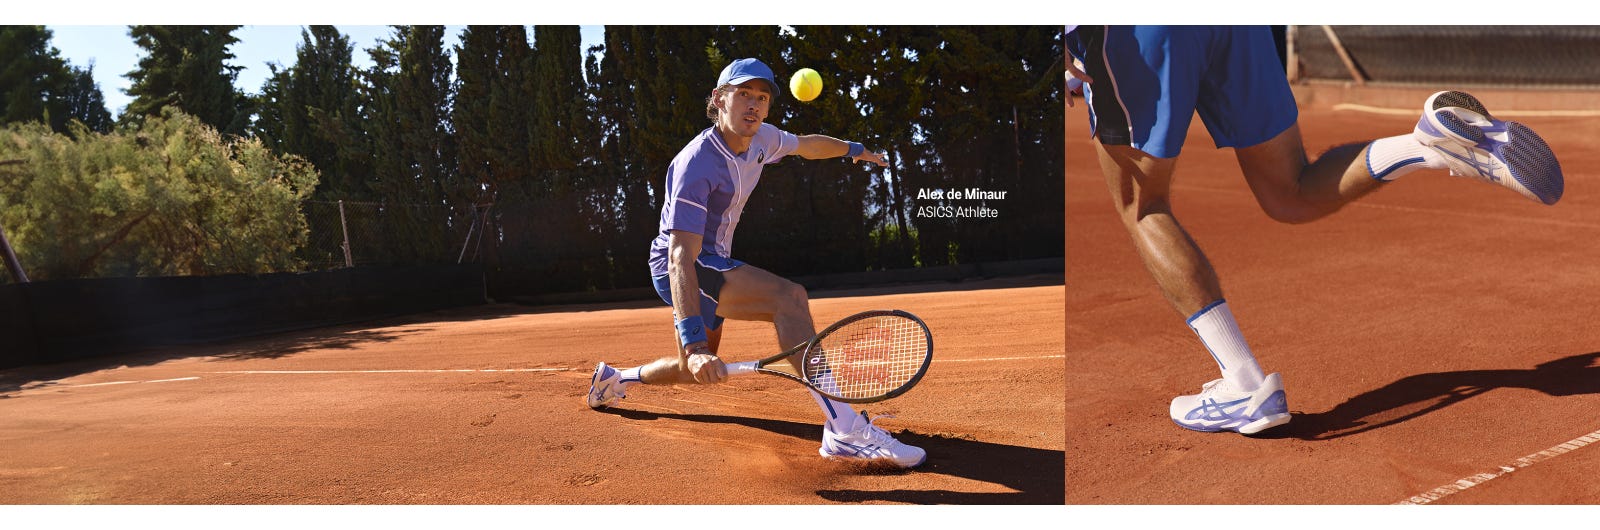 ASICS French Open